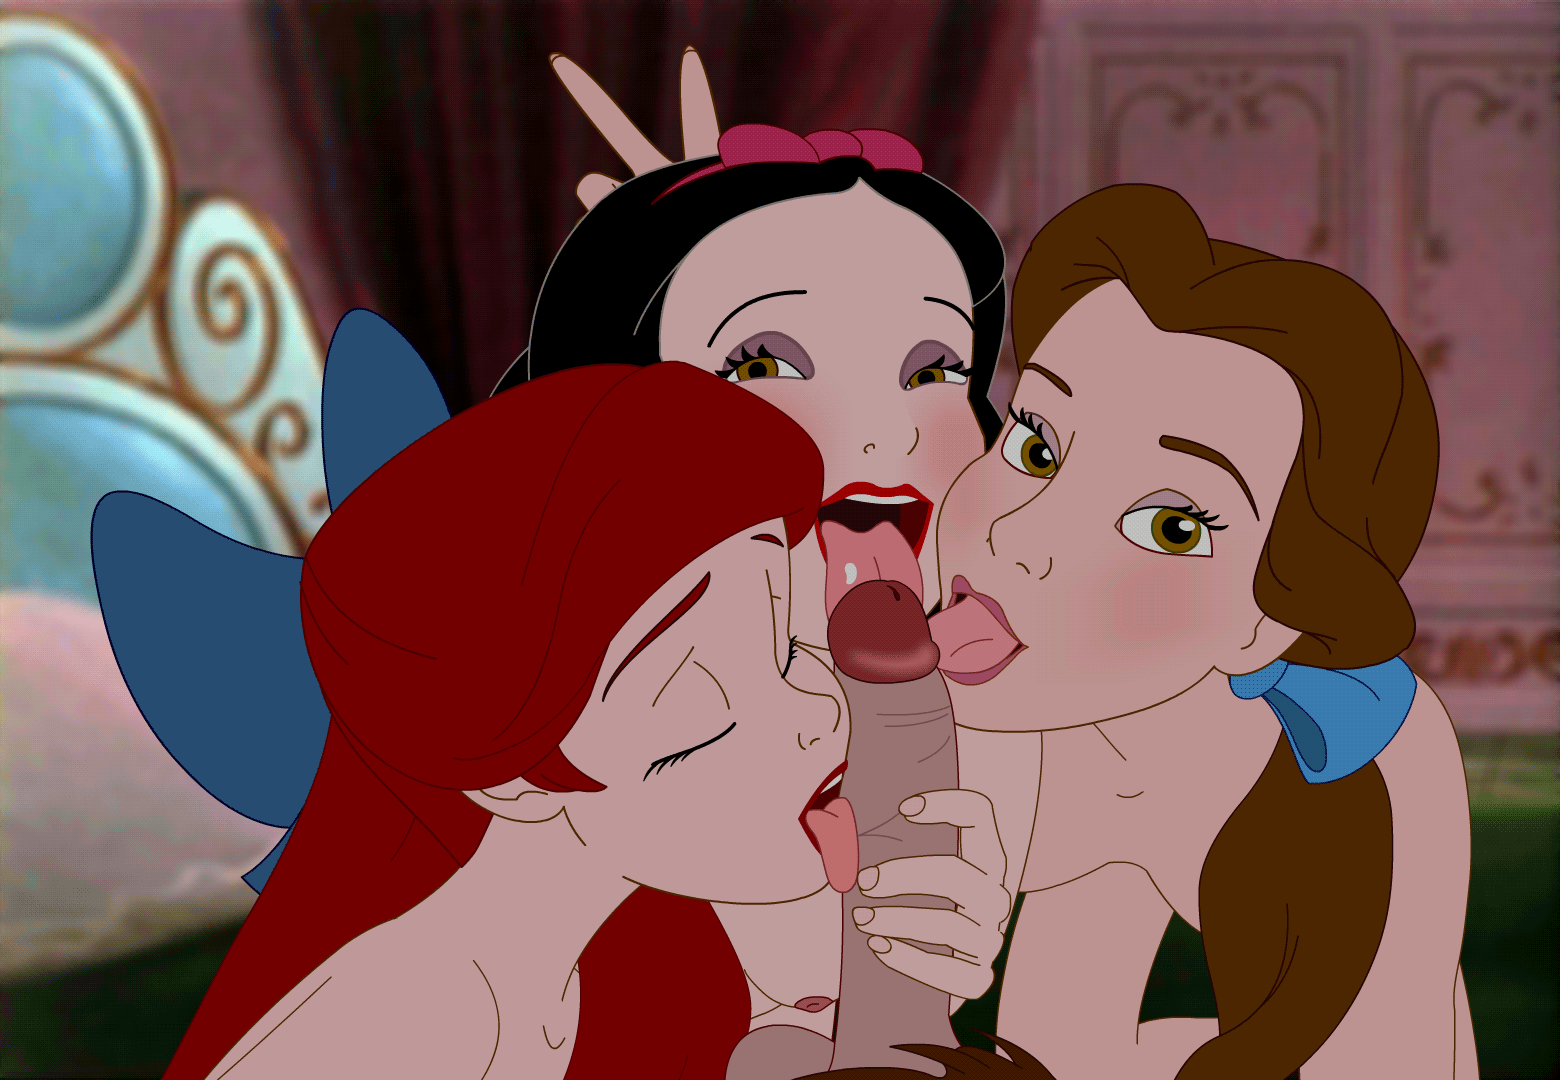 Sex porn. info gif obliging disney princesses 636ac4d3a73c0 about funny-pics. Enjoy watching new porn gifs every day